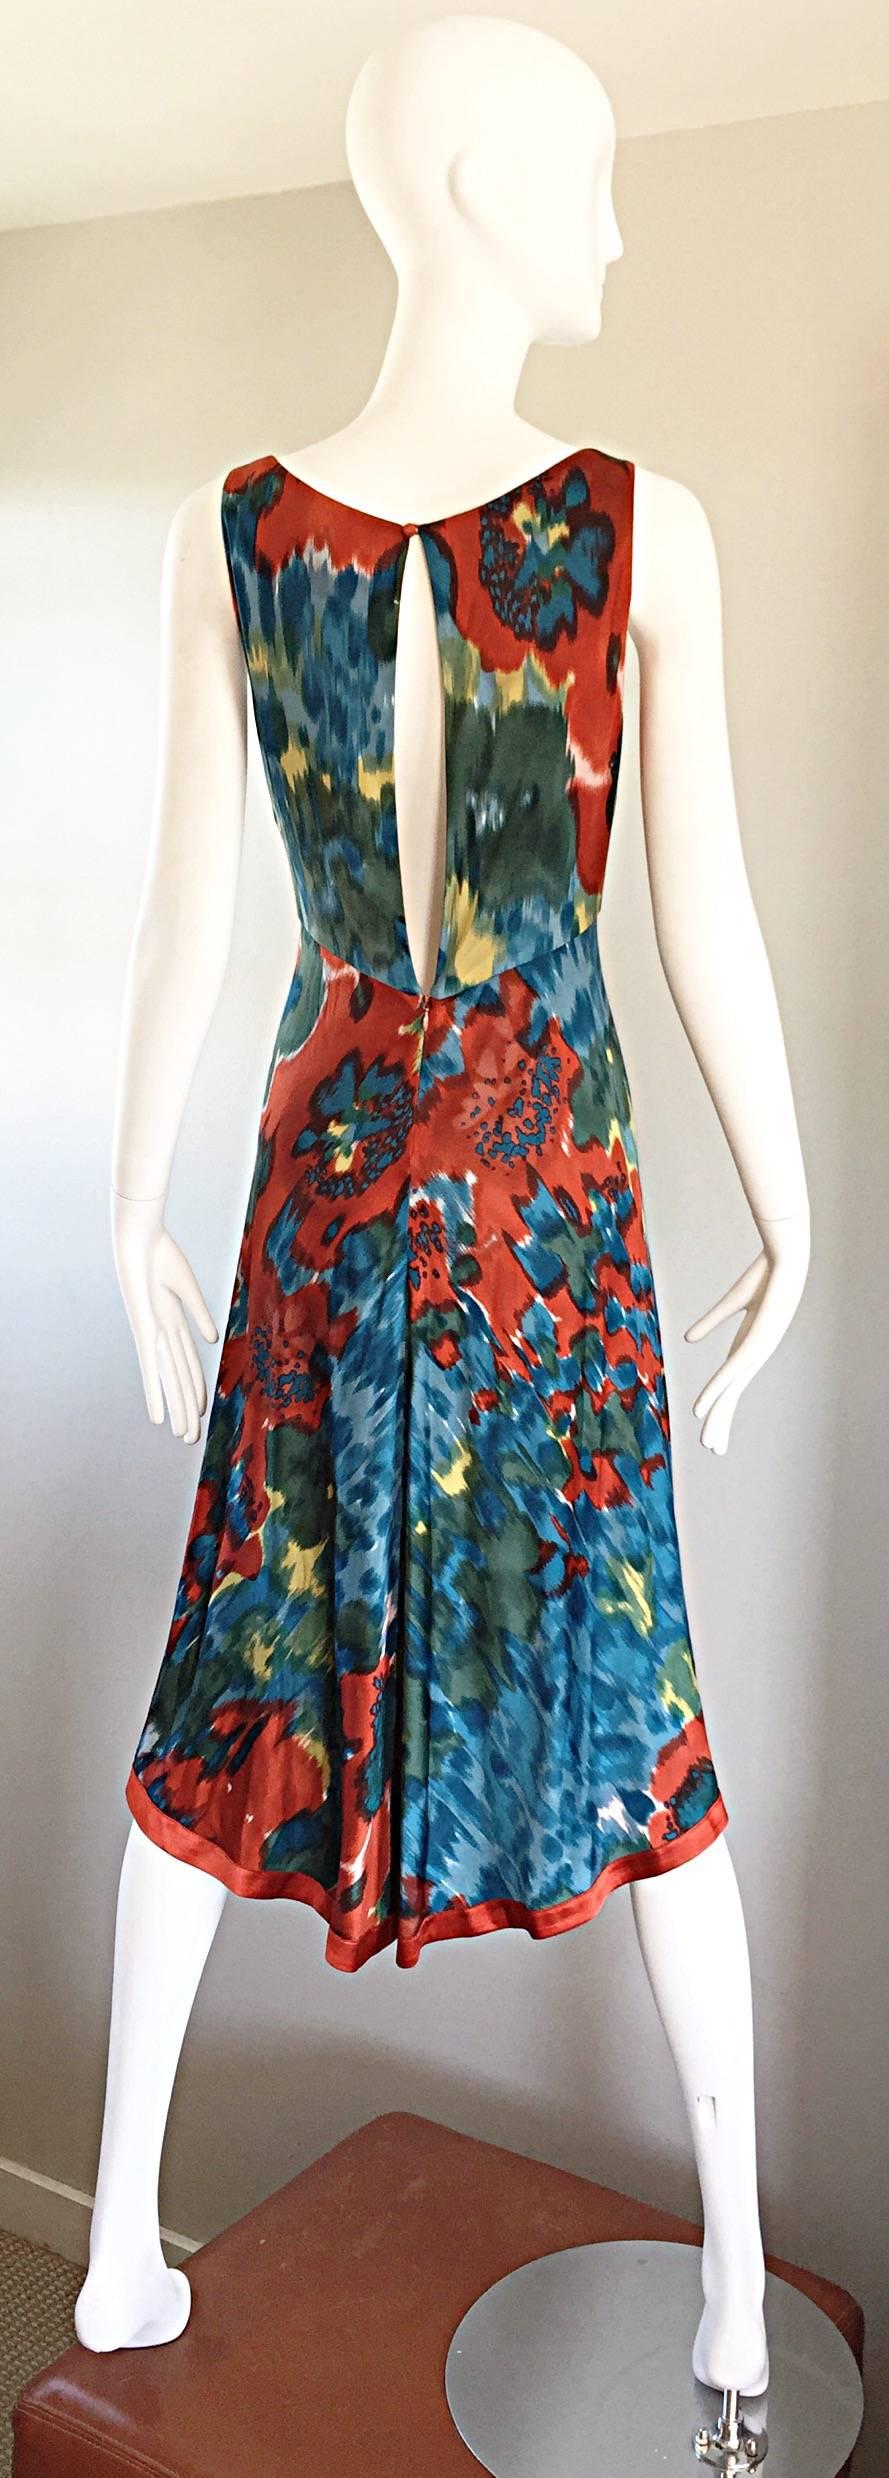 Wonderful brand new (from Barney's) YIGAL AZROUEL boho jersey dress! Warm hues of blue, burnt orange, green, and lime green in a brilliant watercolor  print. Peek-a-boo slit on the back reveals just the right amount of skin. Soft silk and rayon